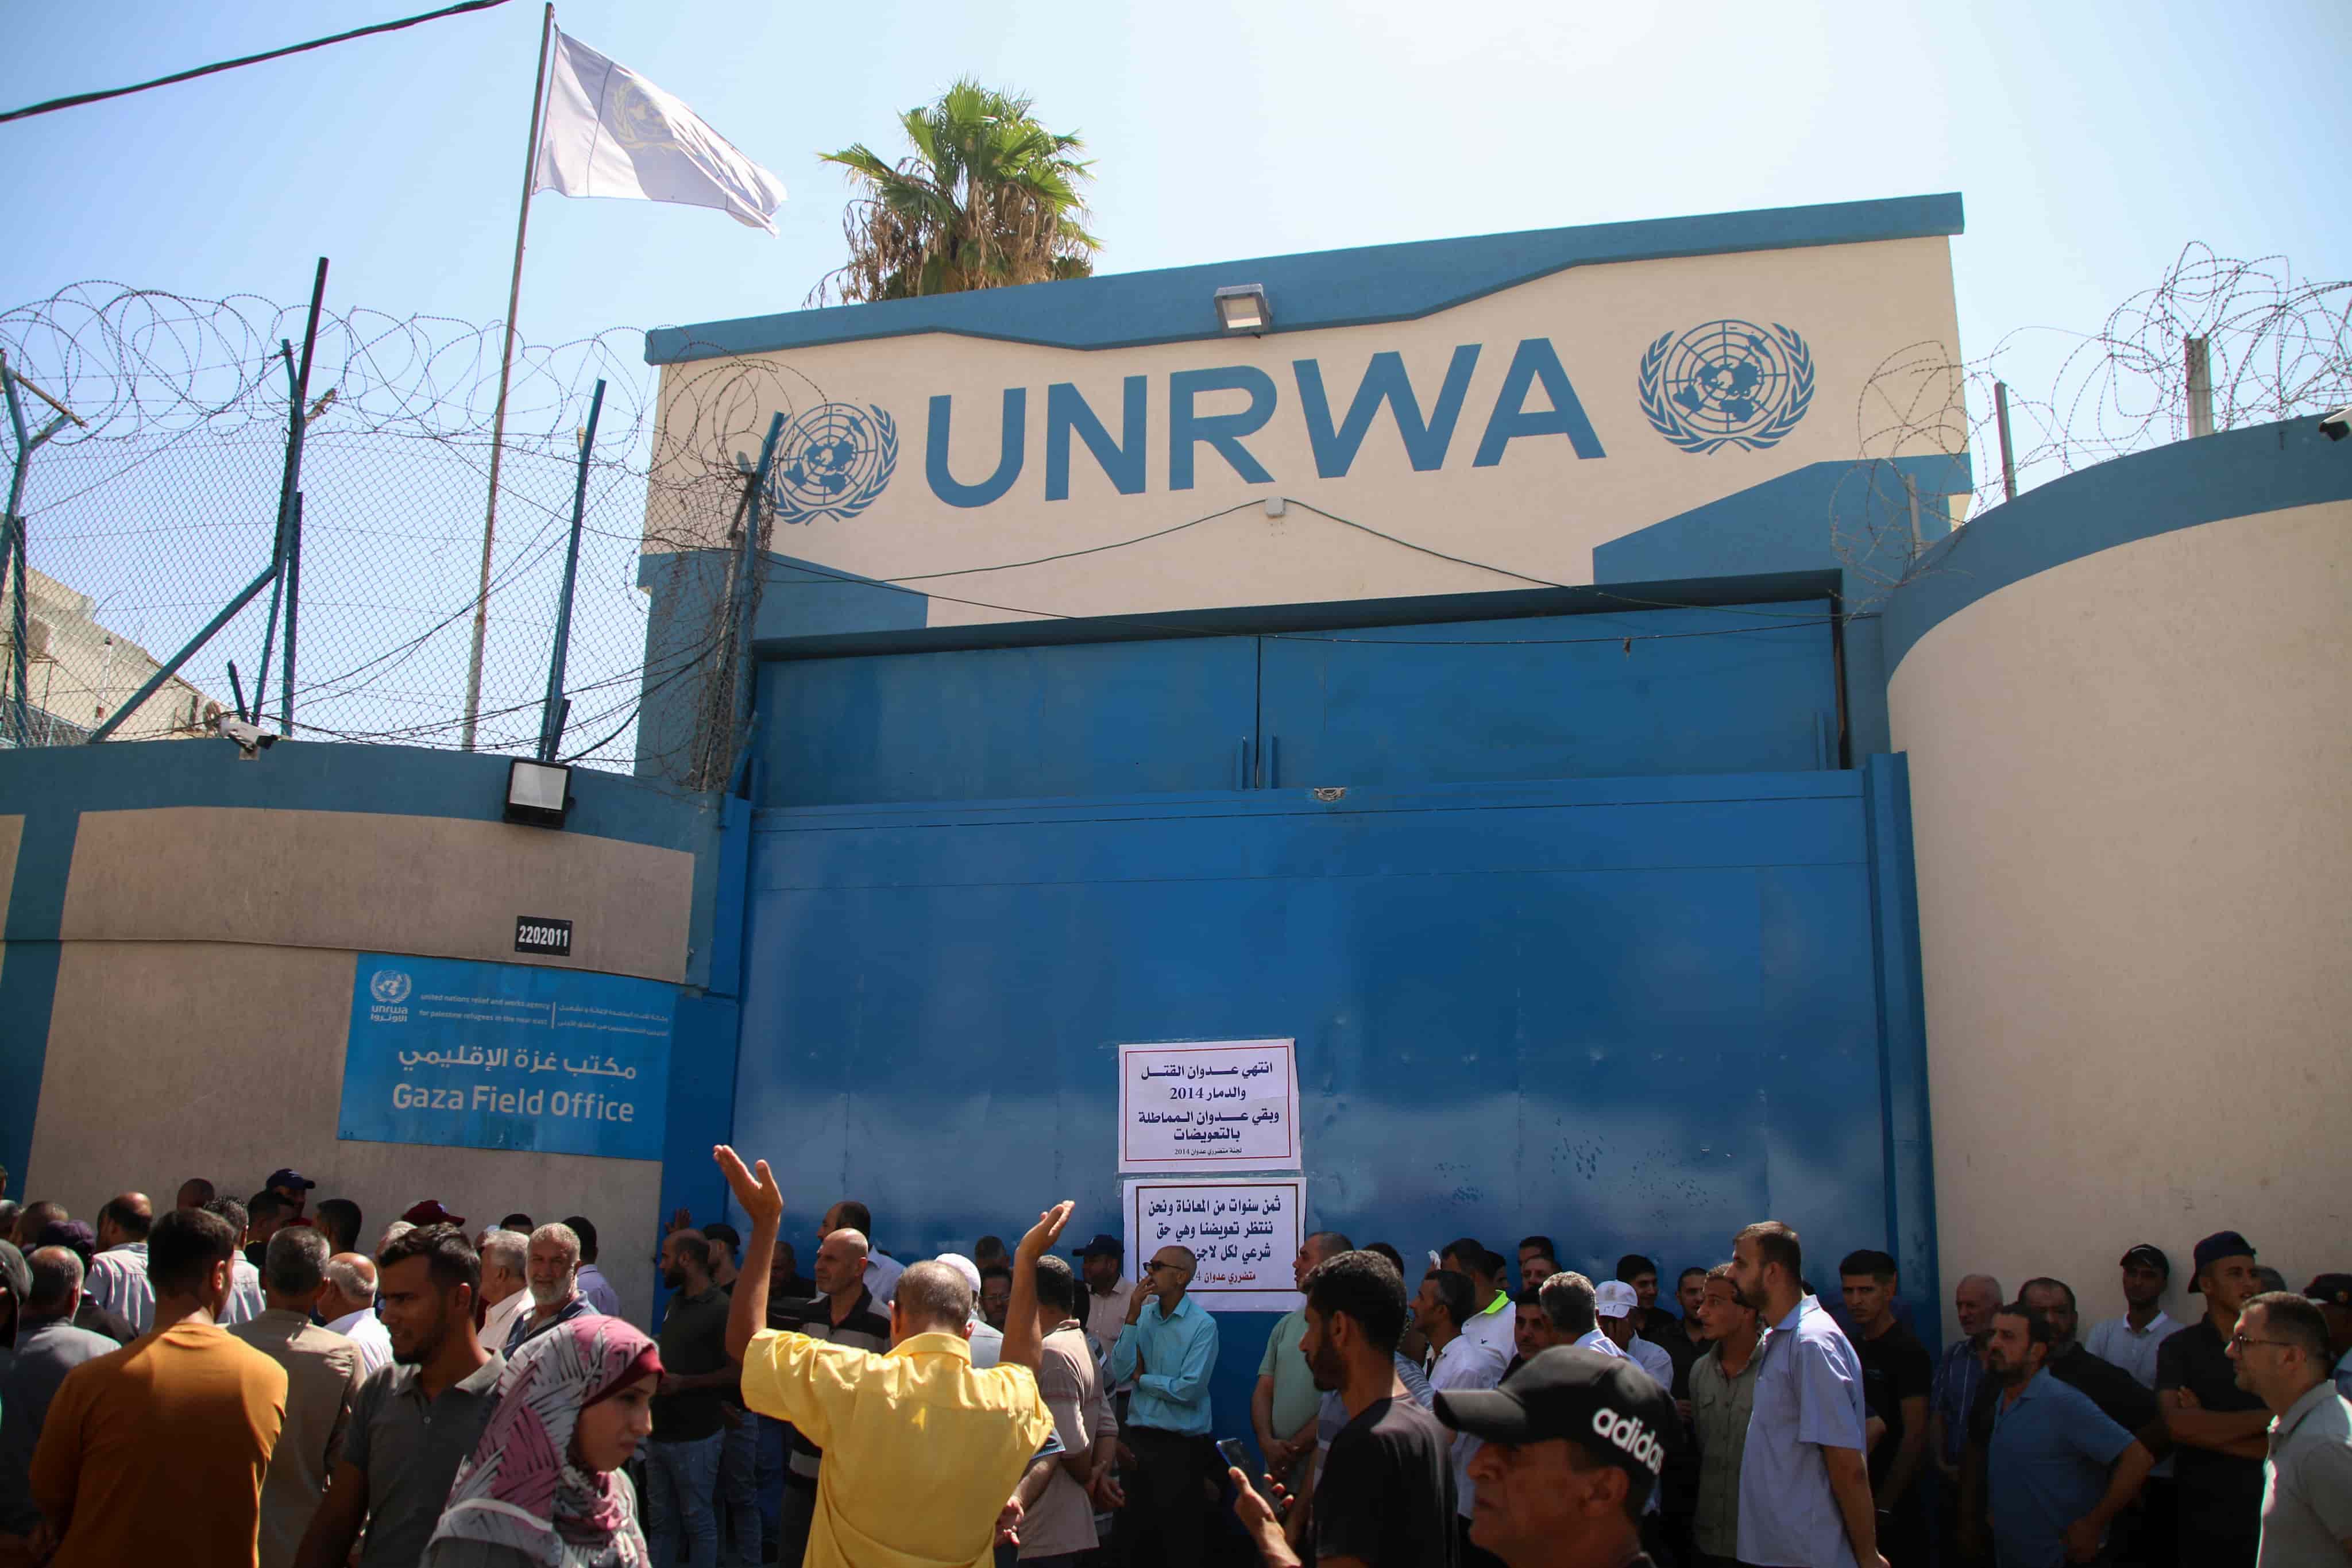 Sweden, Canada Resume Funding for UNRWA